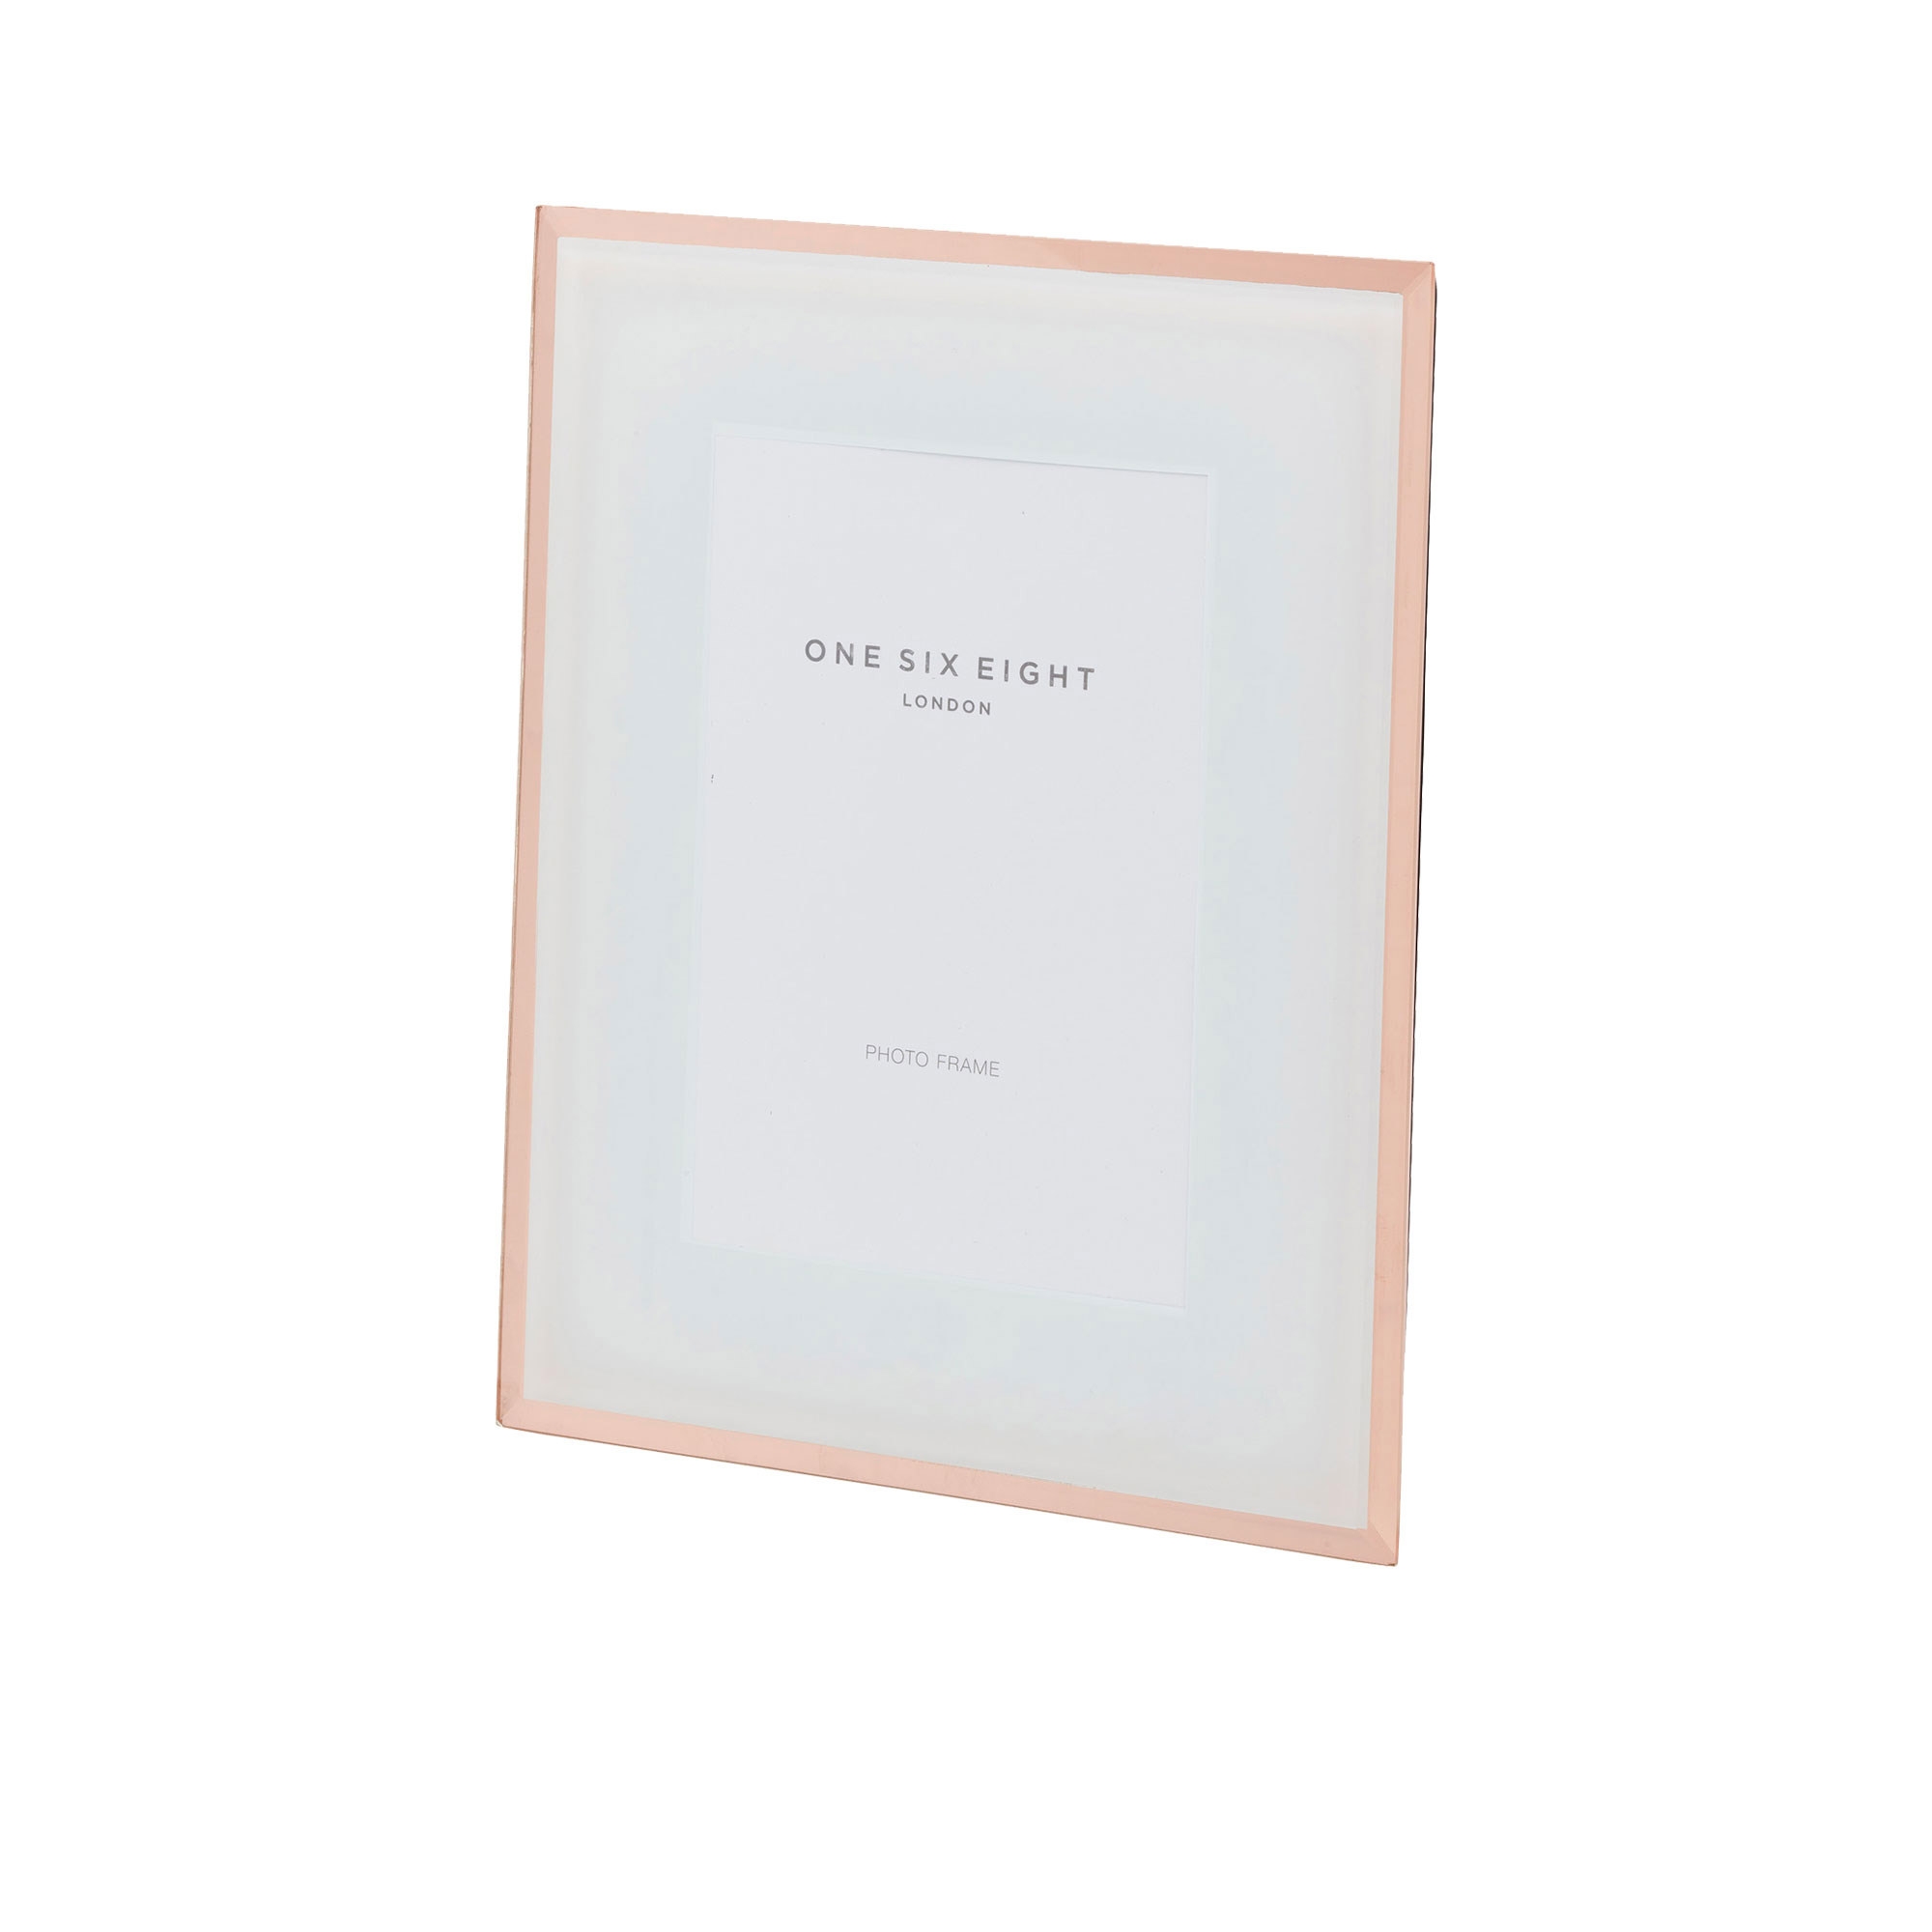 One Six Eight London Glass Photo Frame 18x23cm White Rose Gold Image 1